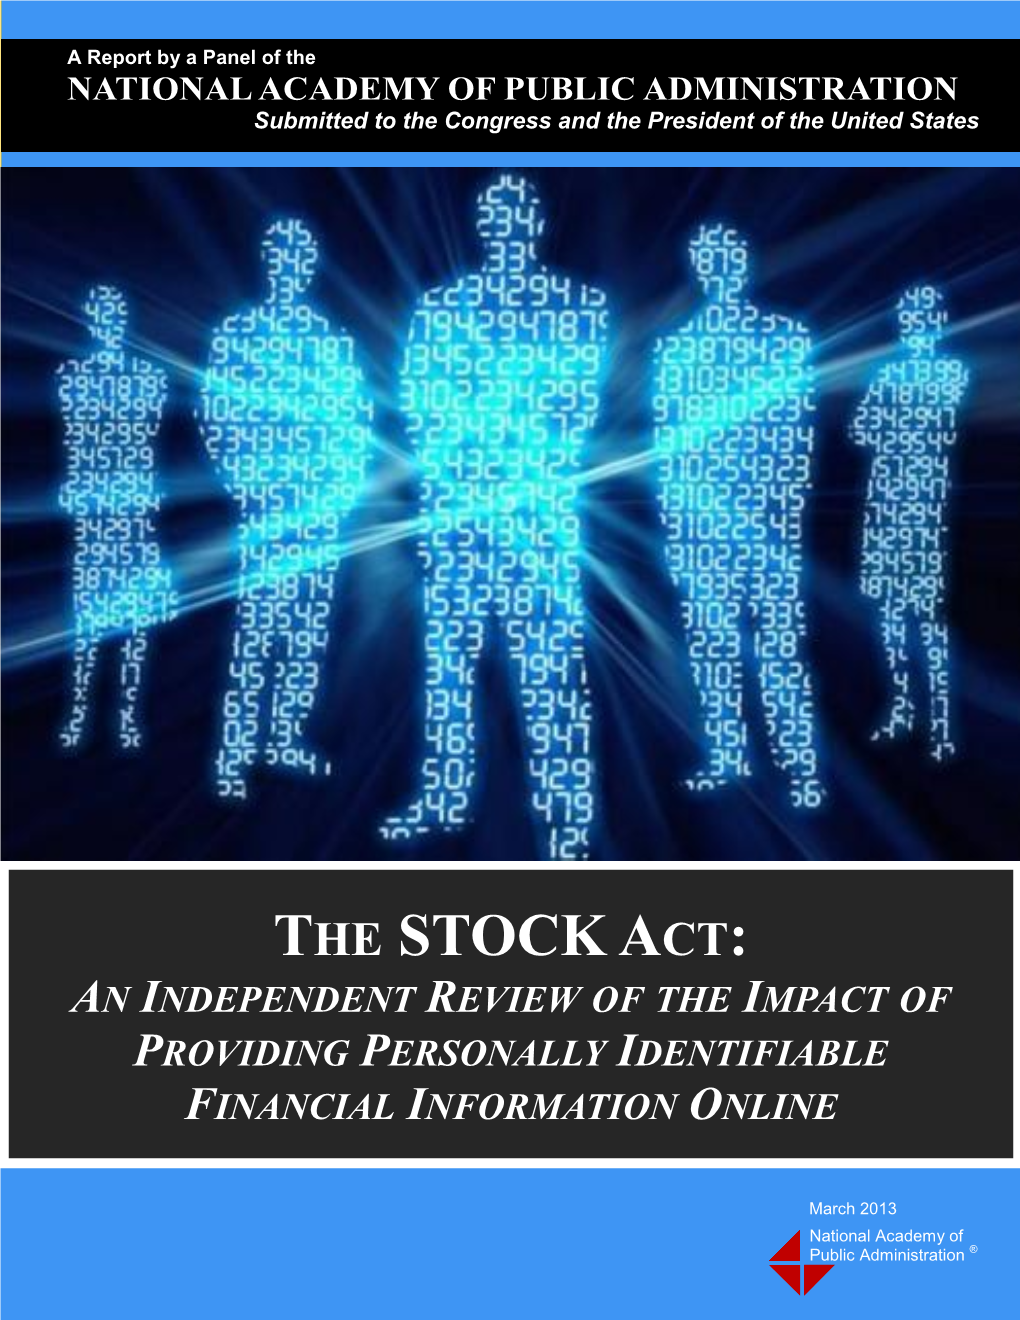 The Stock Act: an Independent Review of the Impact of Providing Personally Identifiable Financial Information Online